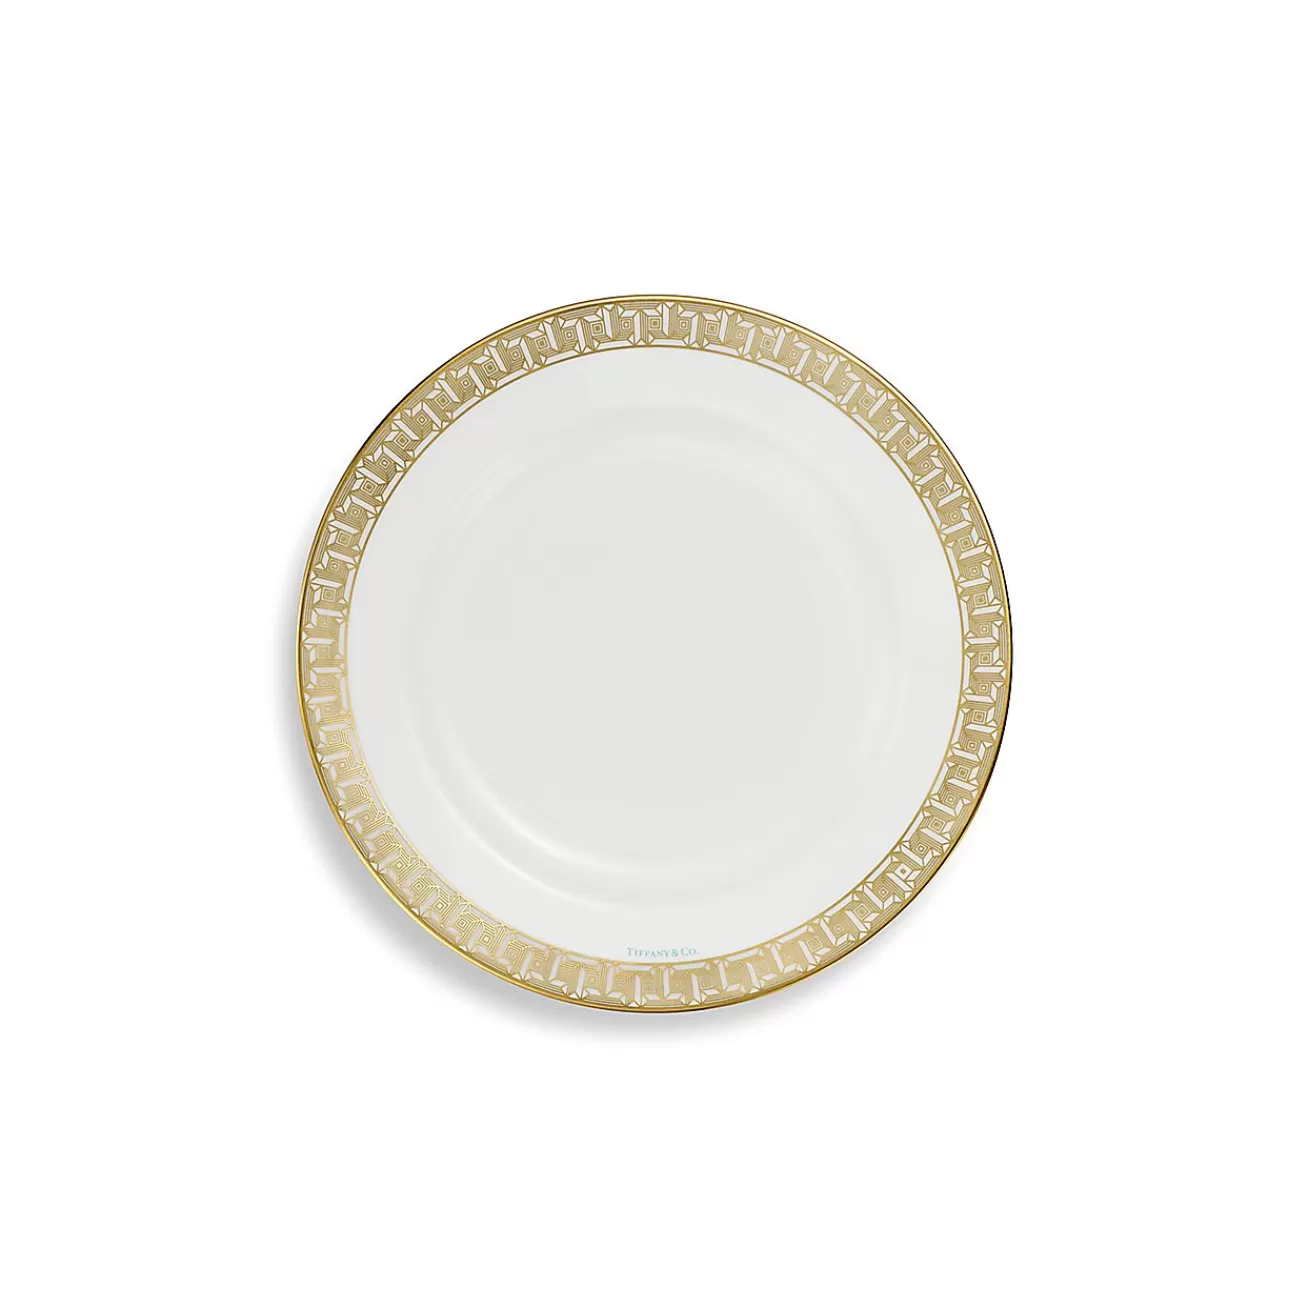 Tiffany & Co. Tiffany T True Bread and Butter Plate with a Hand-painted Gold Rim | ^ Tableware